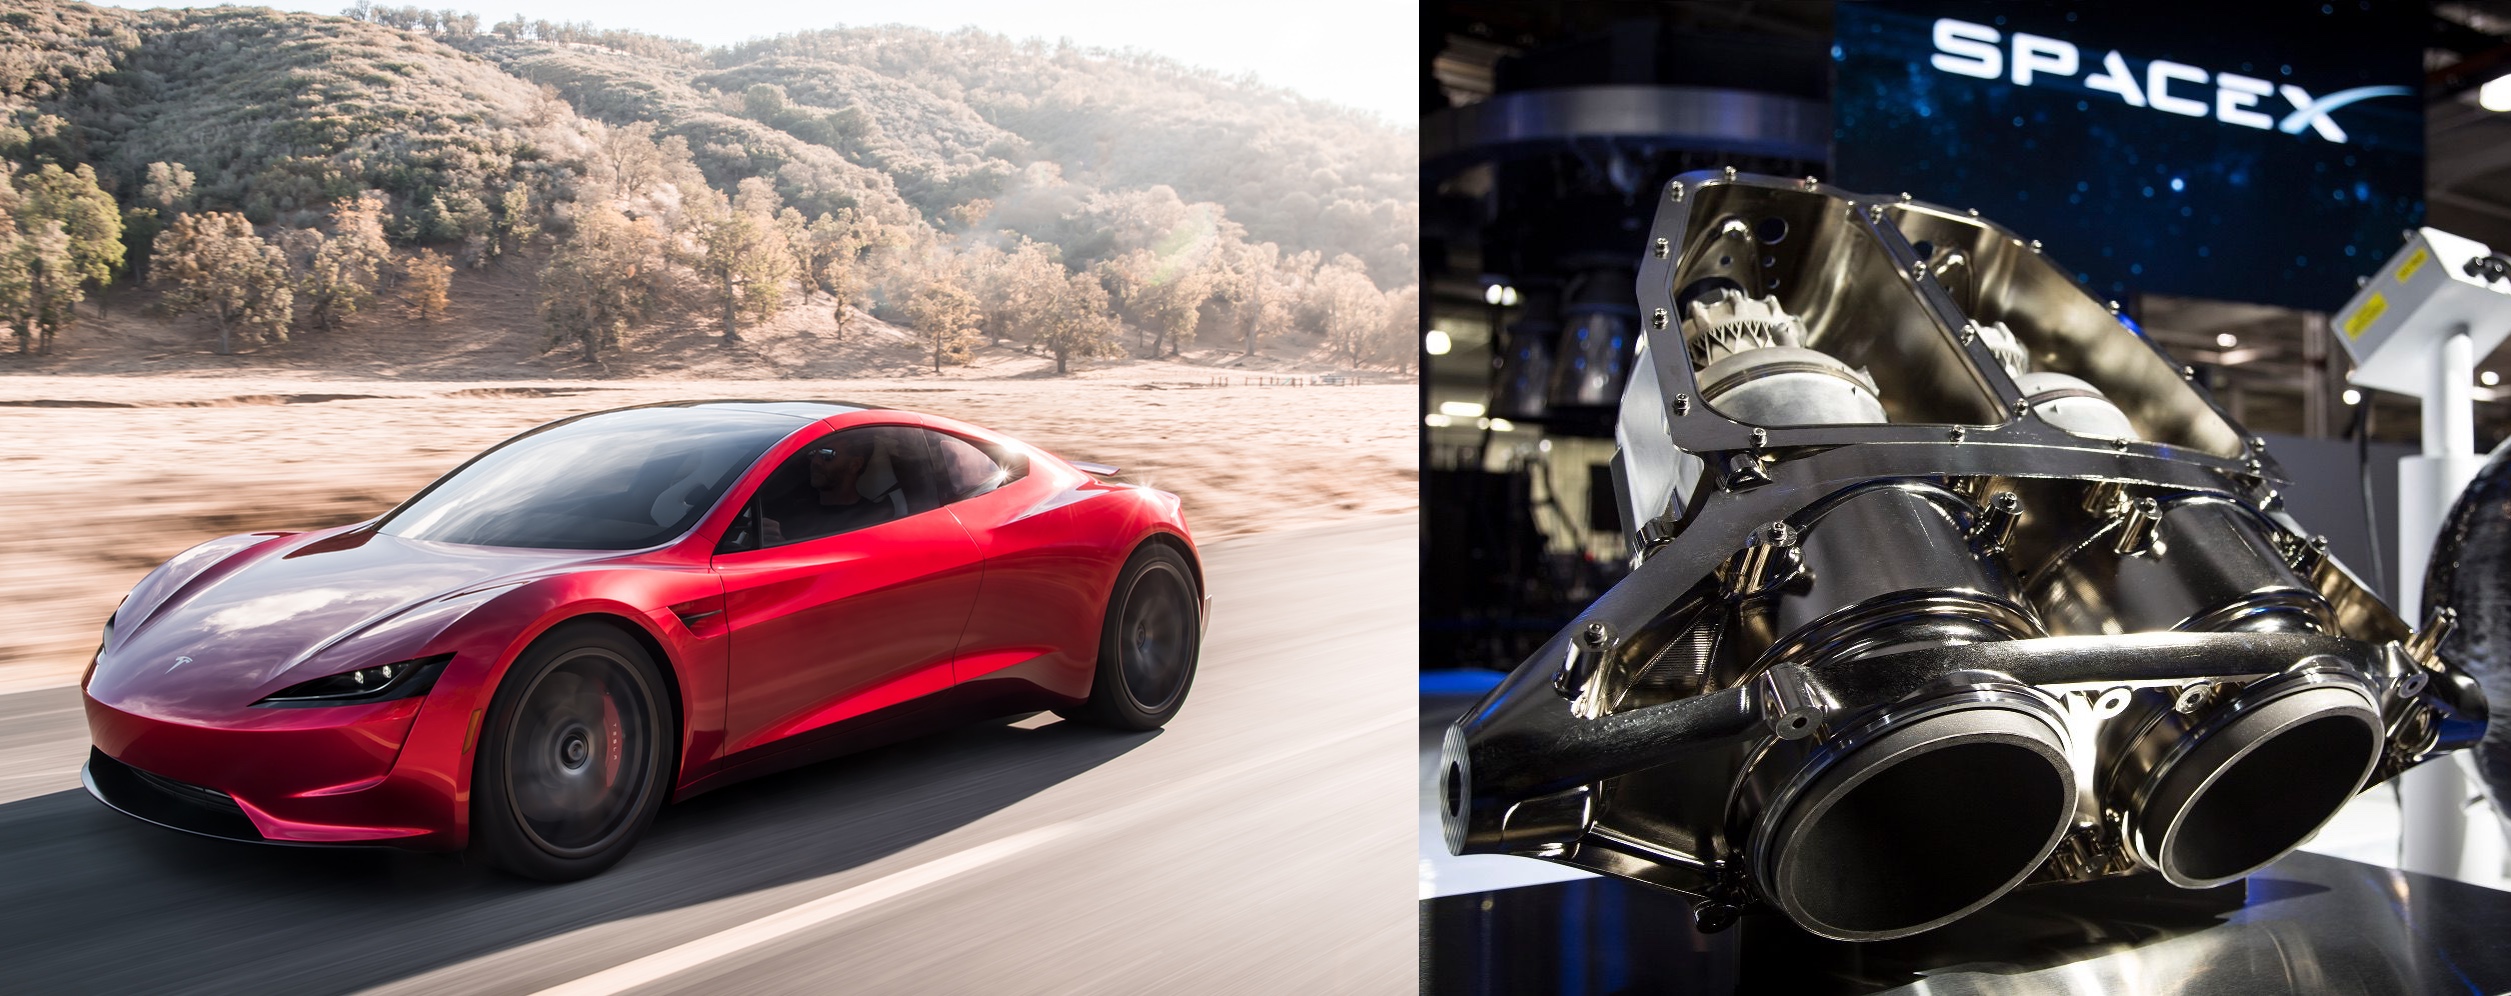 Tesla Aims For Roadster Hover Test With Spacex Package Late Next Year Elon Musk Says Electrek